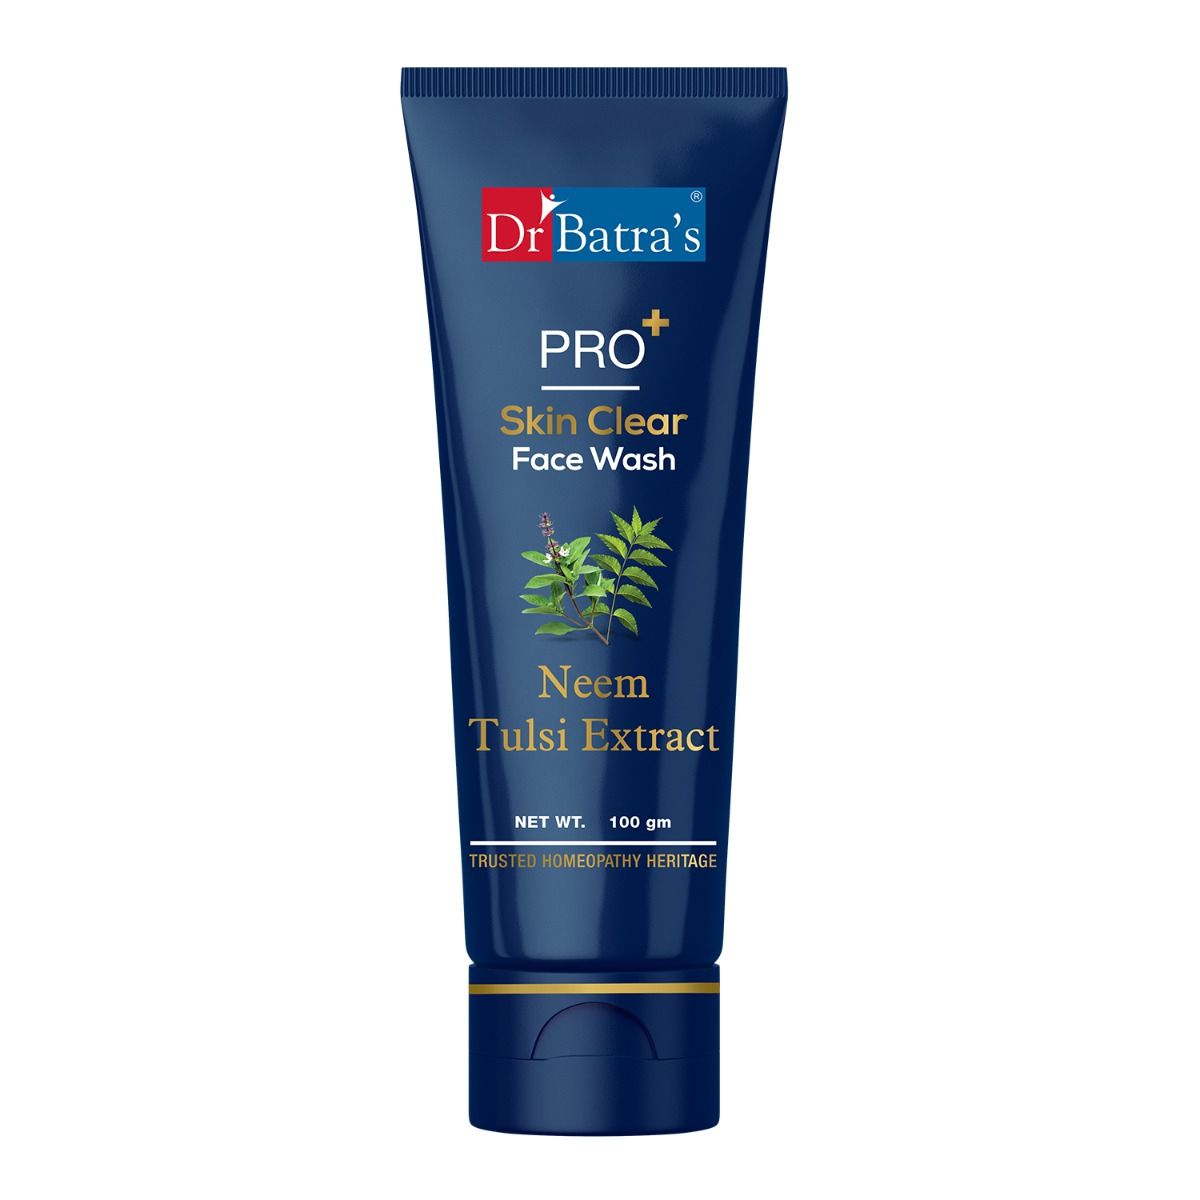     			Dr Batra's PRO +Skin Clear Face wash 100 gm |Enriched WithTulsi|Neem|Aloe Vera Juice Gel Extracts| Face Wash for Clear Skin 100g